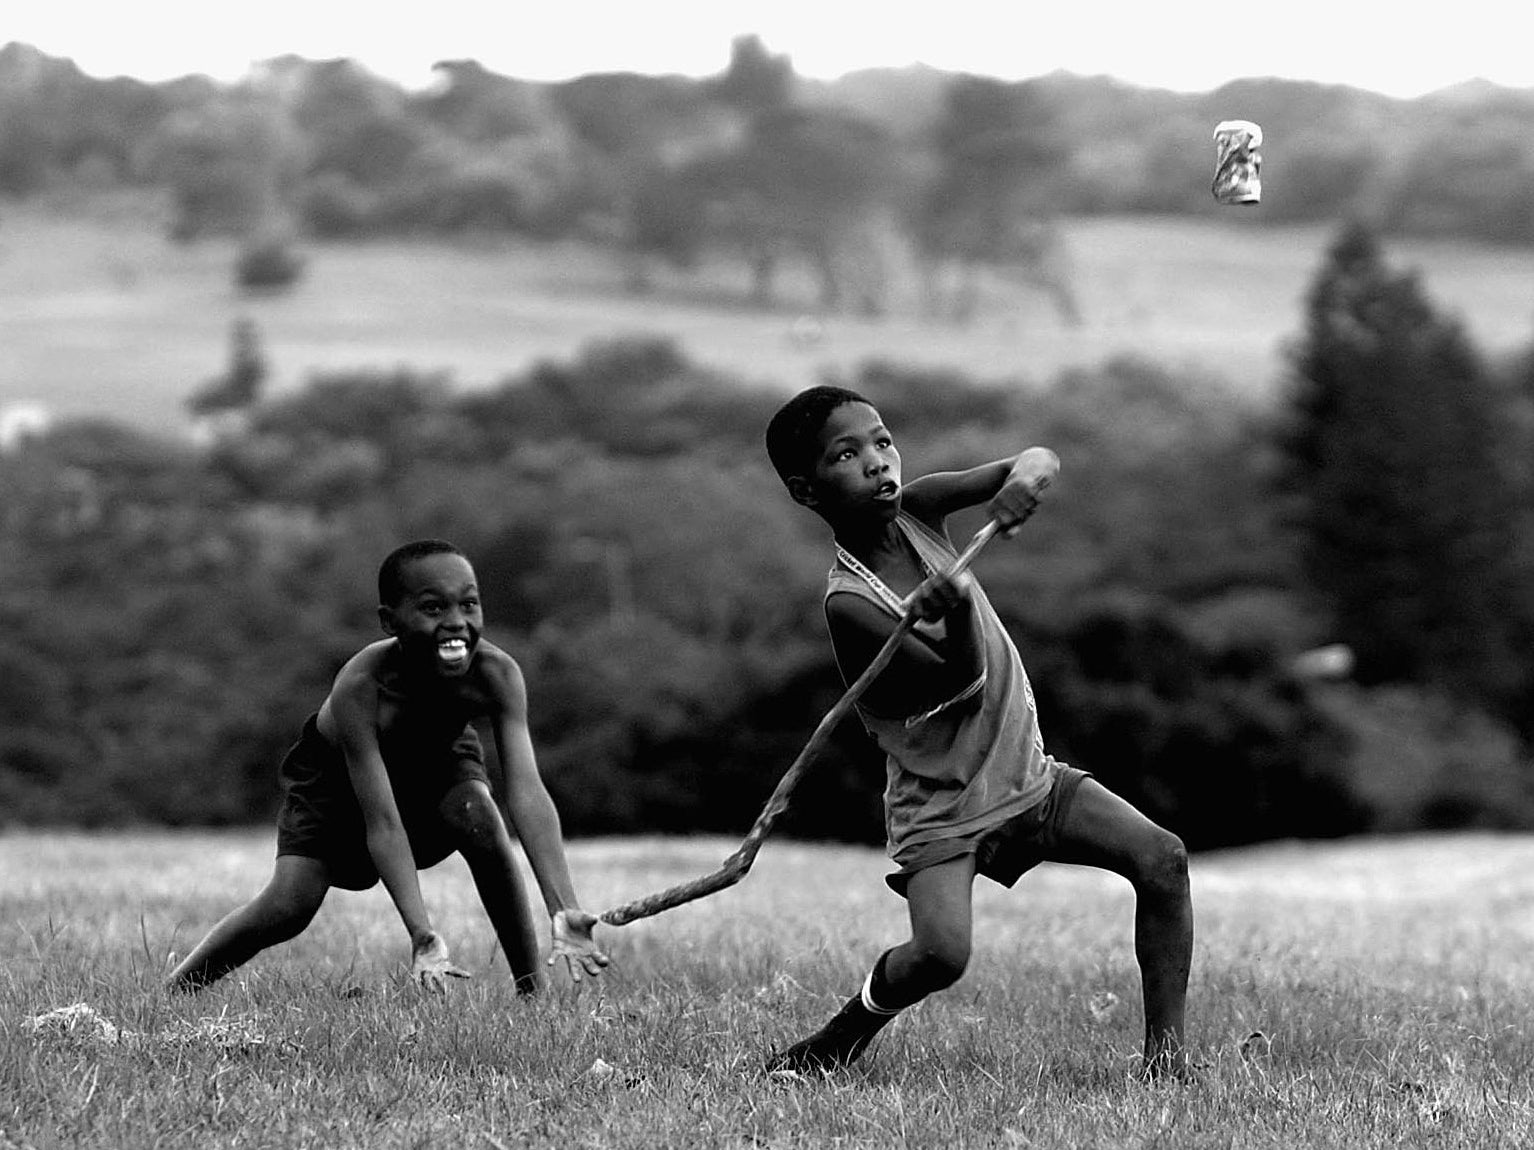 South African children playing cricket with a stick and a Coke can